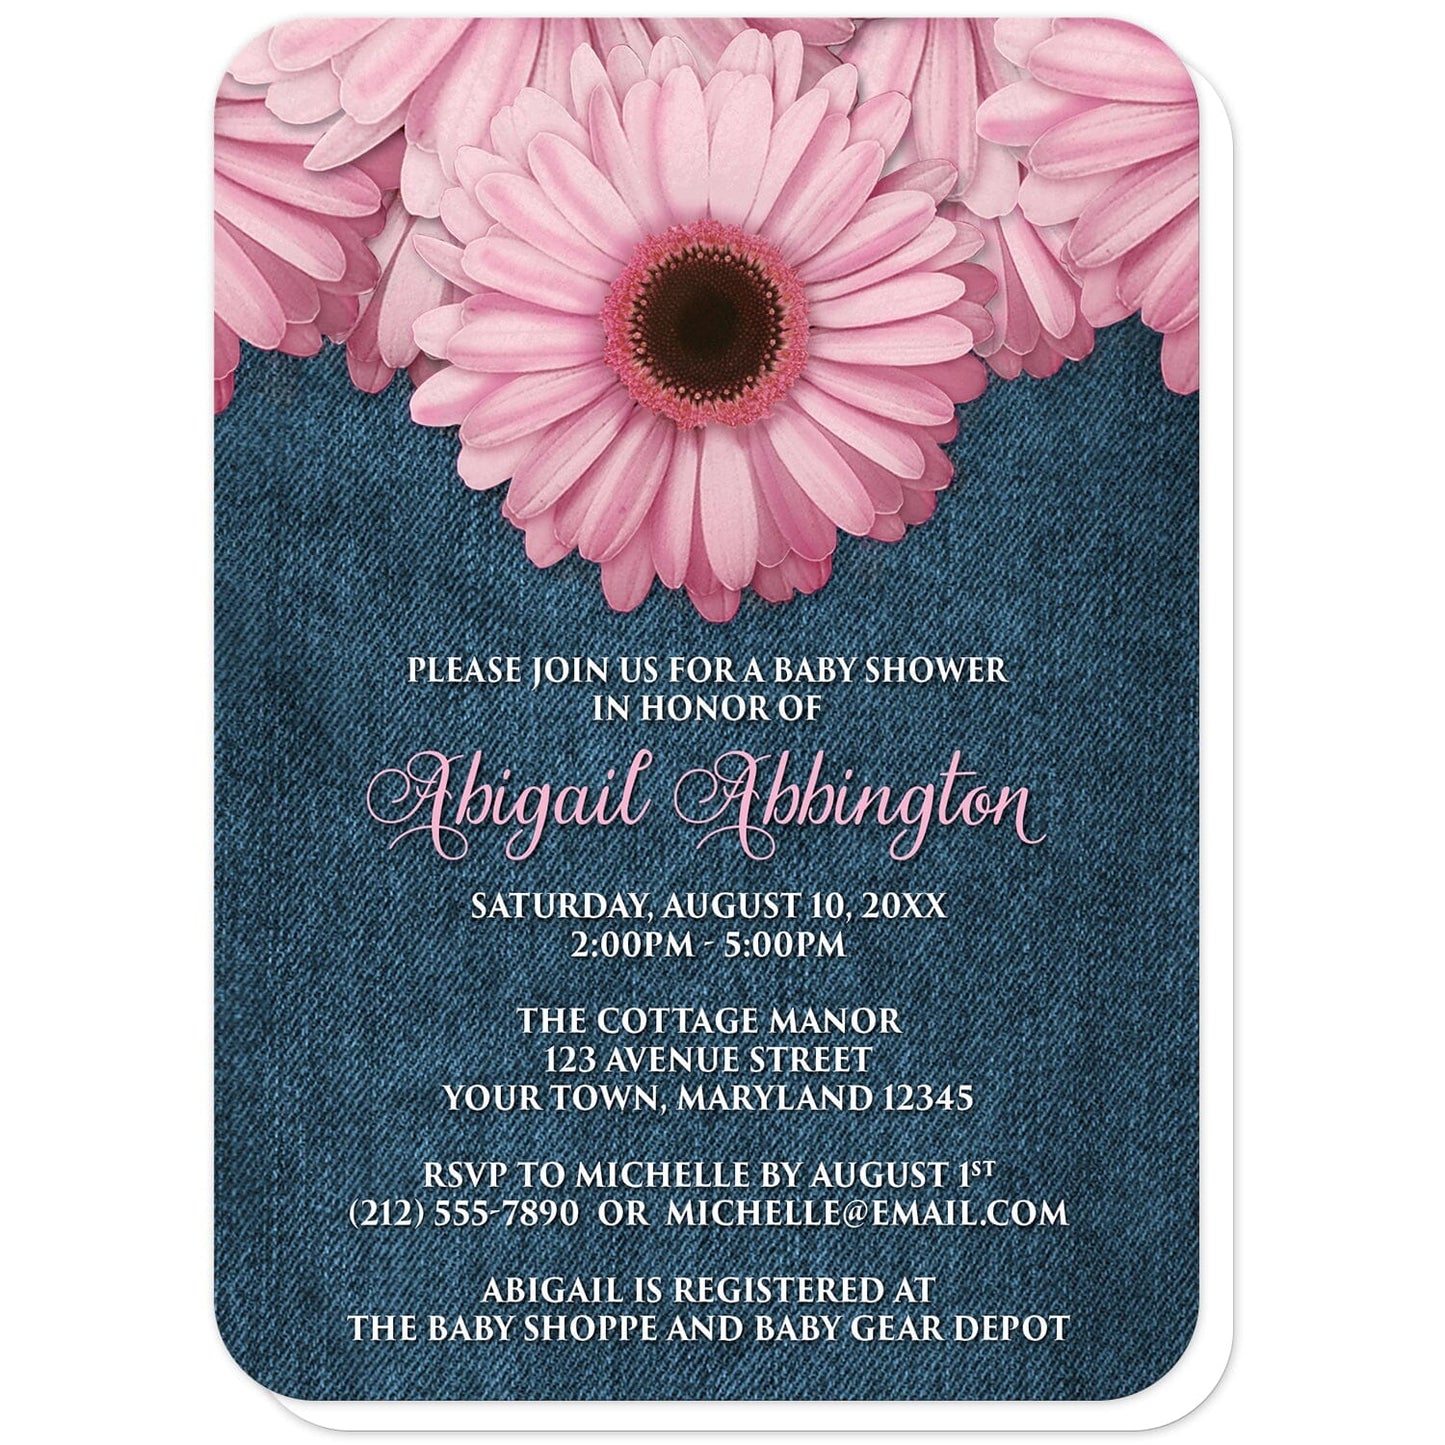 Rustic Pink Daisy and Denim Baby Shower Invitations (with rounded corners) at Artistically Invited. Rustic pink daisy and denim baby shower invitations designed with large and lovely pink daisy flowers along the top over a country blue denim background illustration. Your personalized baby shower celebration details are custom printed in pink and white over the denim background design below the pretty pink daisies.